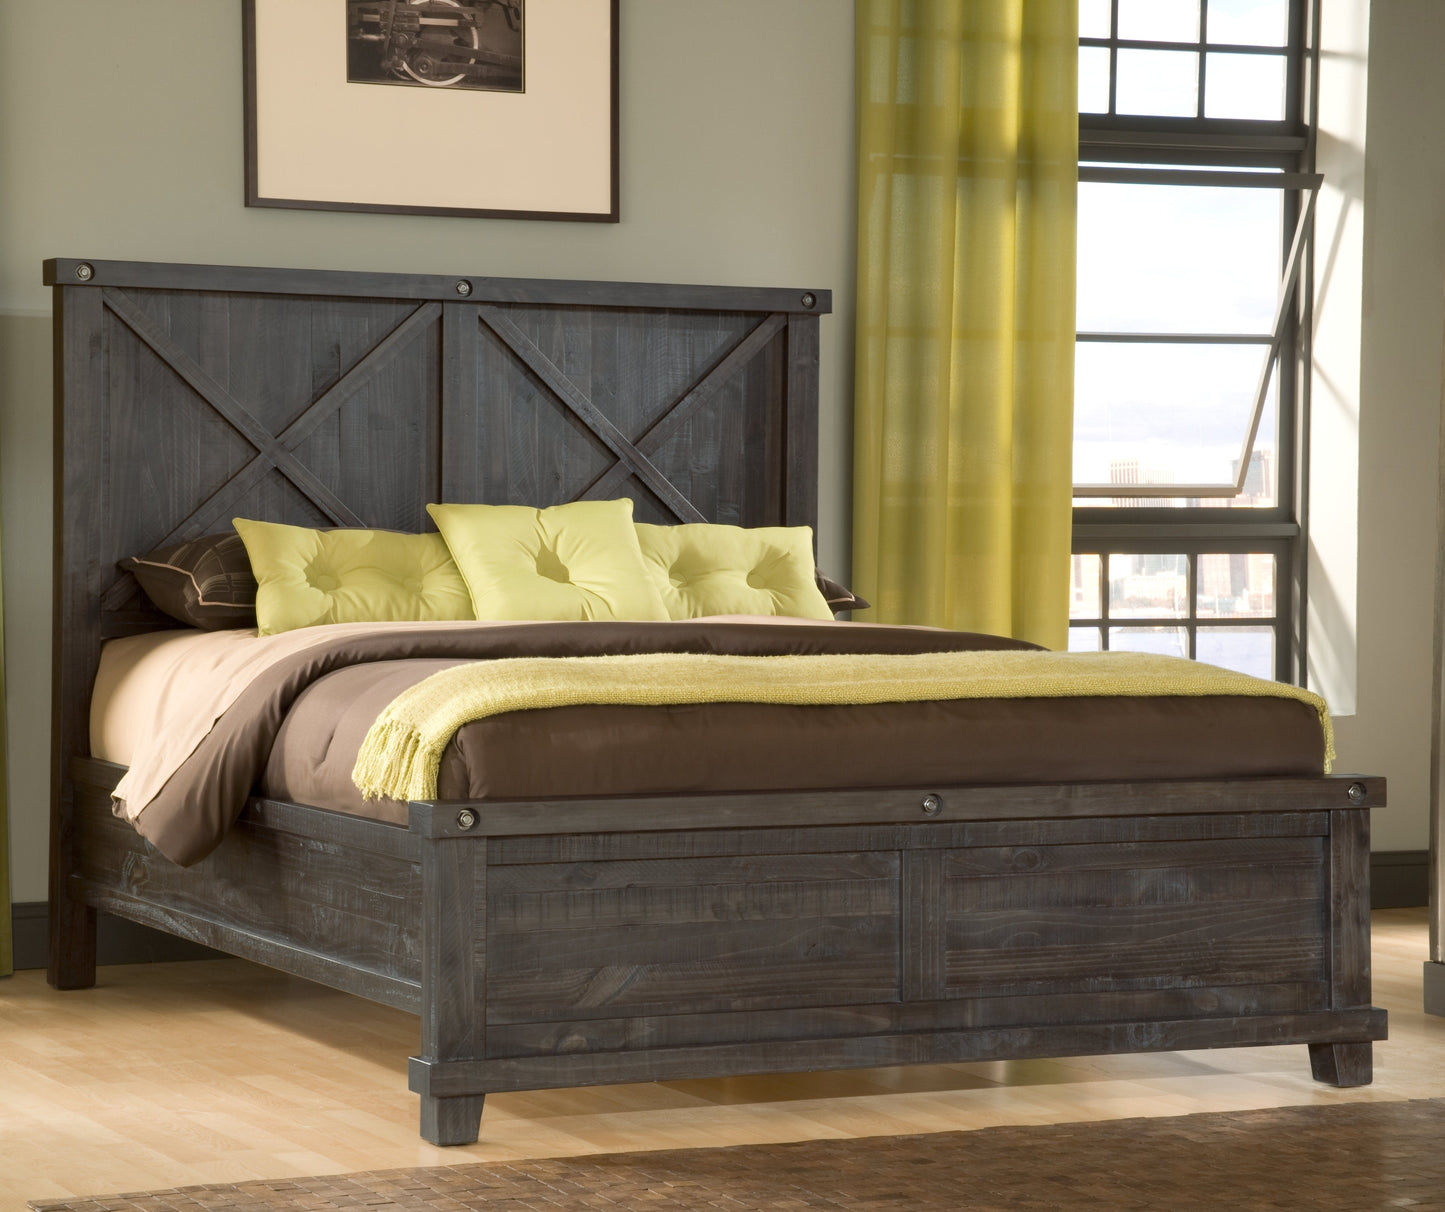 Modus Yosemite Queen Bed in Cafe